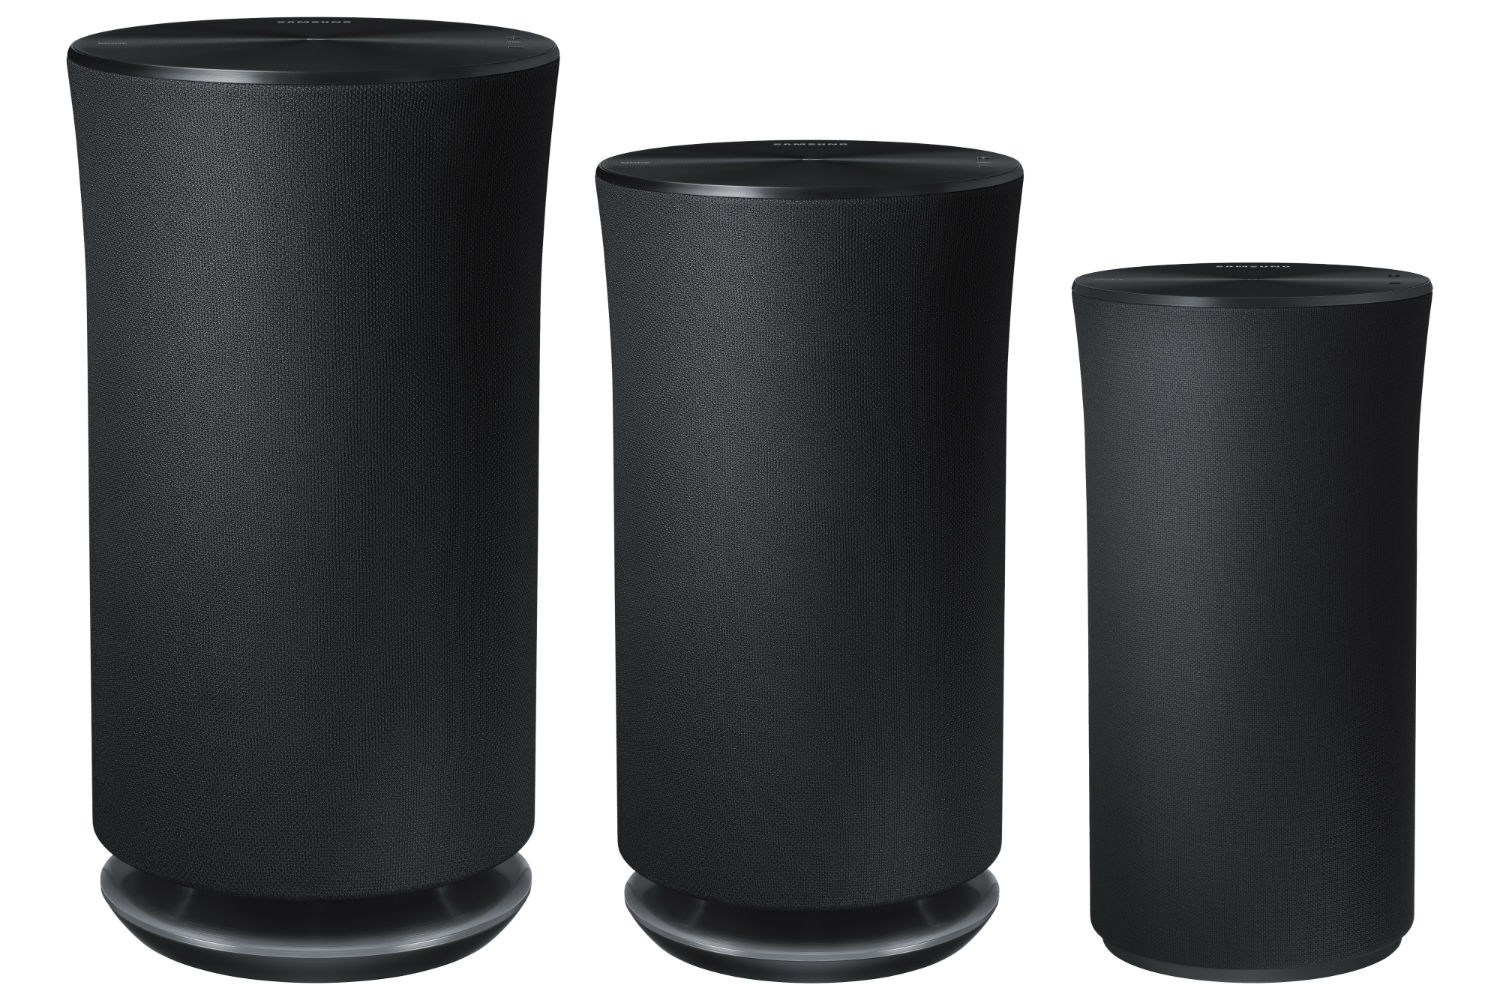 samsung adds three new dressed up models to radiant360 wireless speaker series image